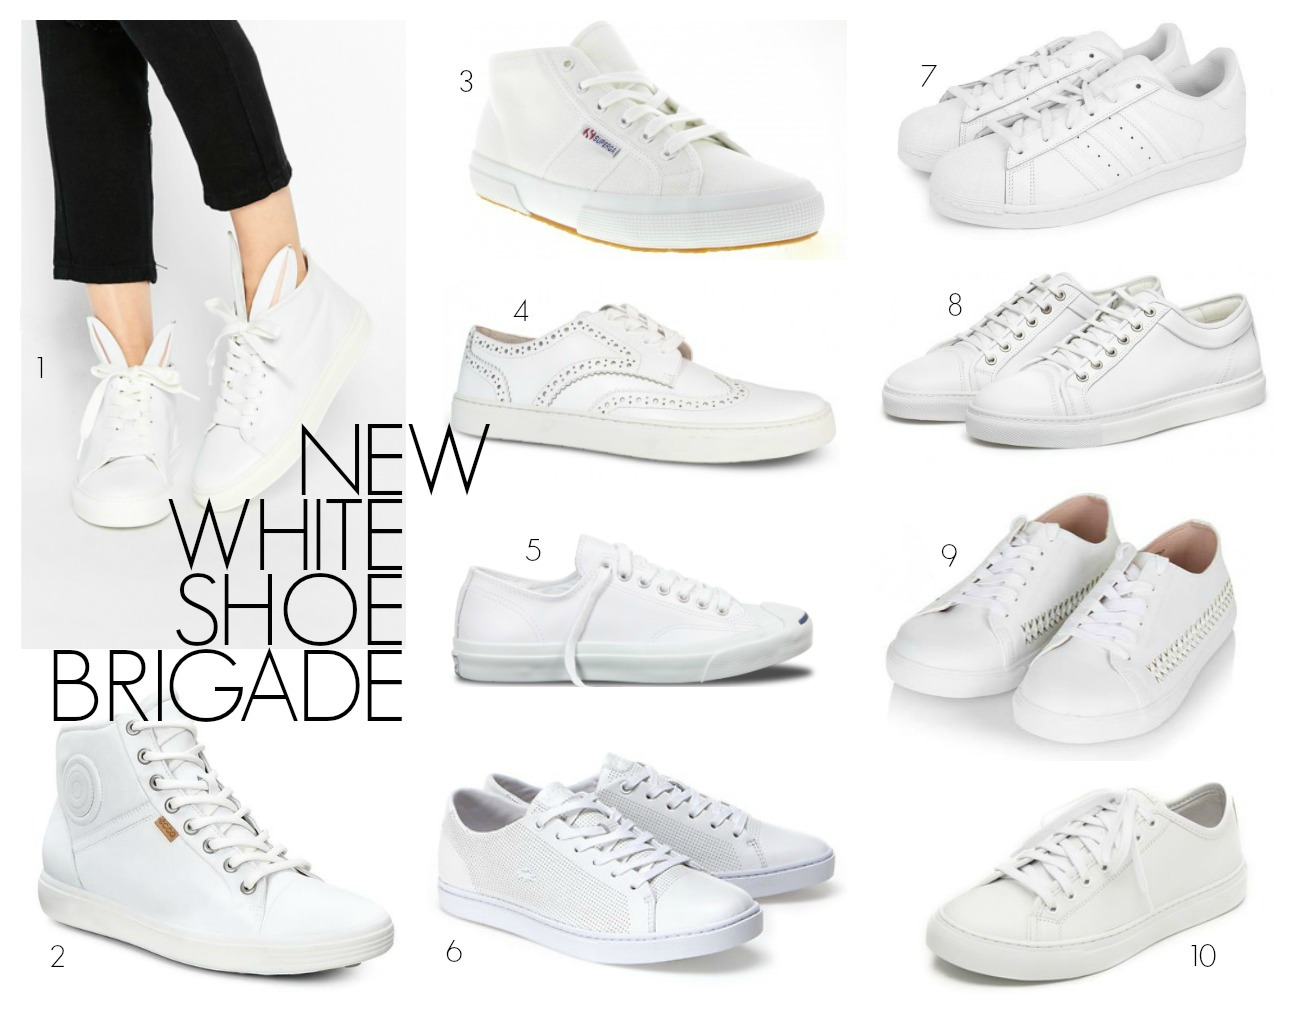 WHAT EVERY WOMAN NEEDS: WARDROBE 101: THE NEW WHITE SHOE BRIGADE